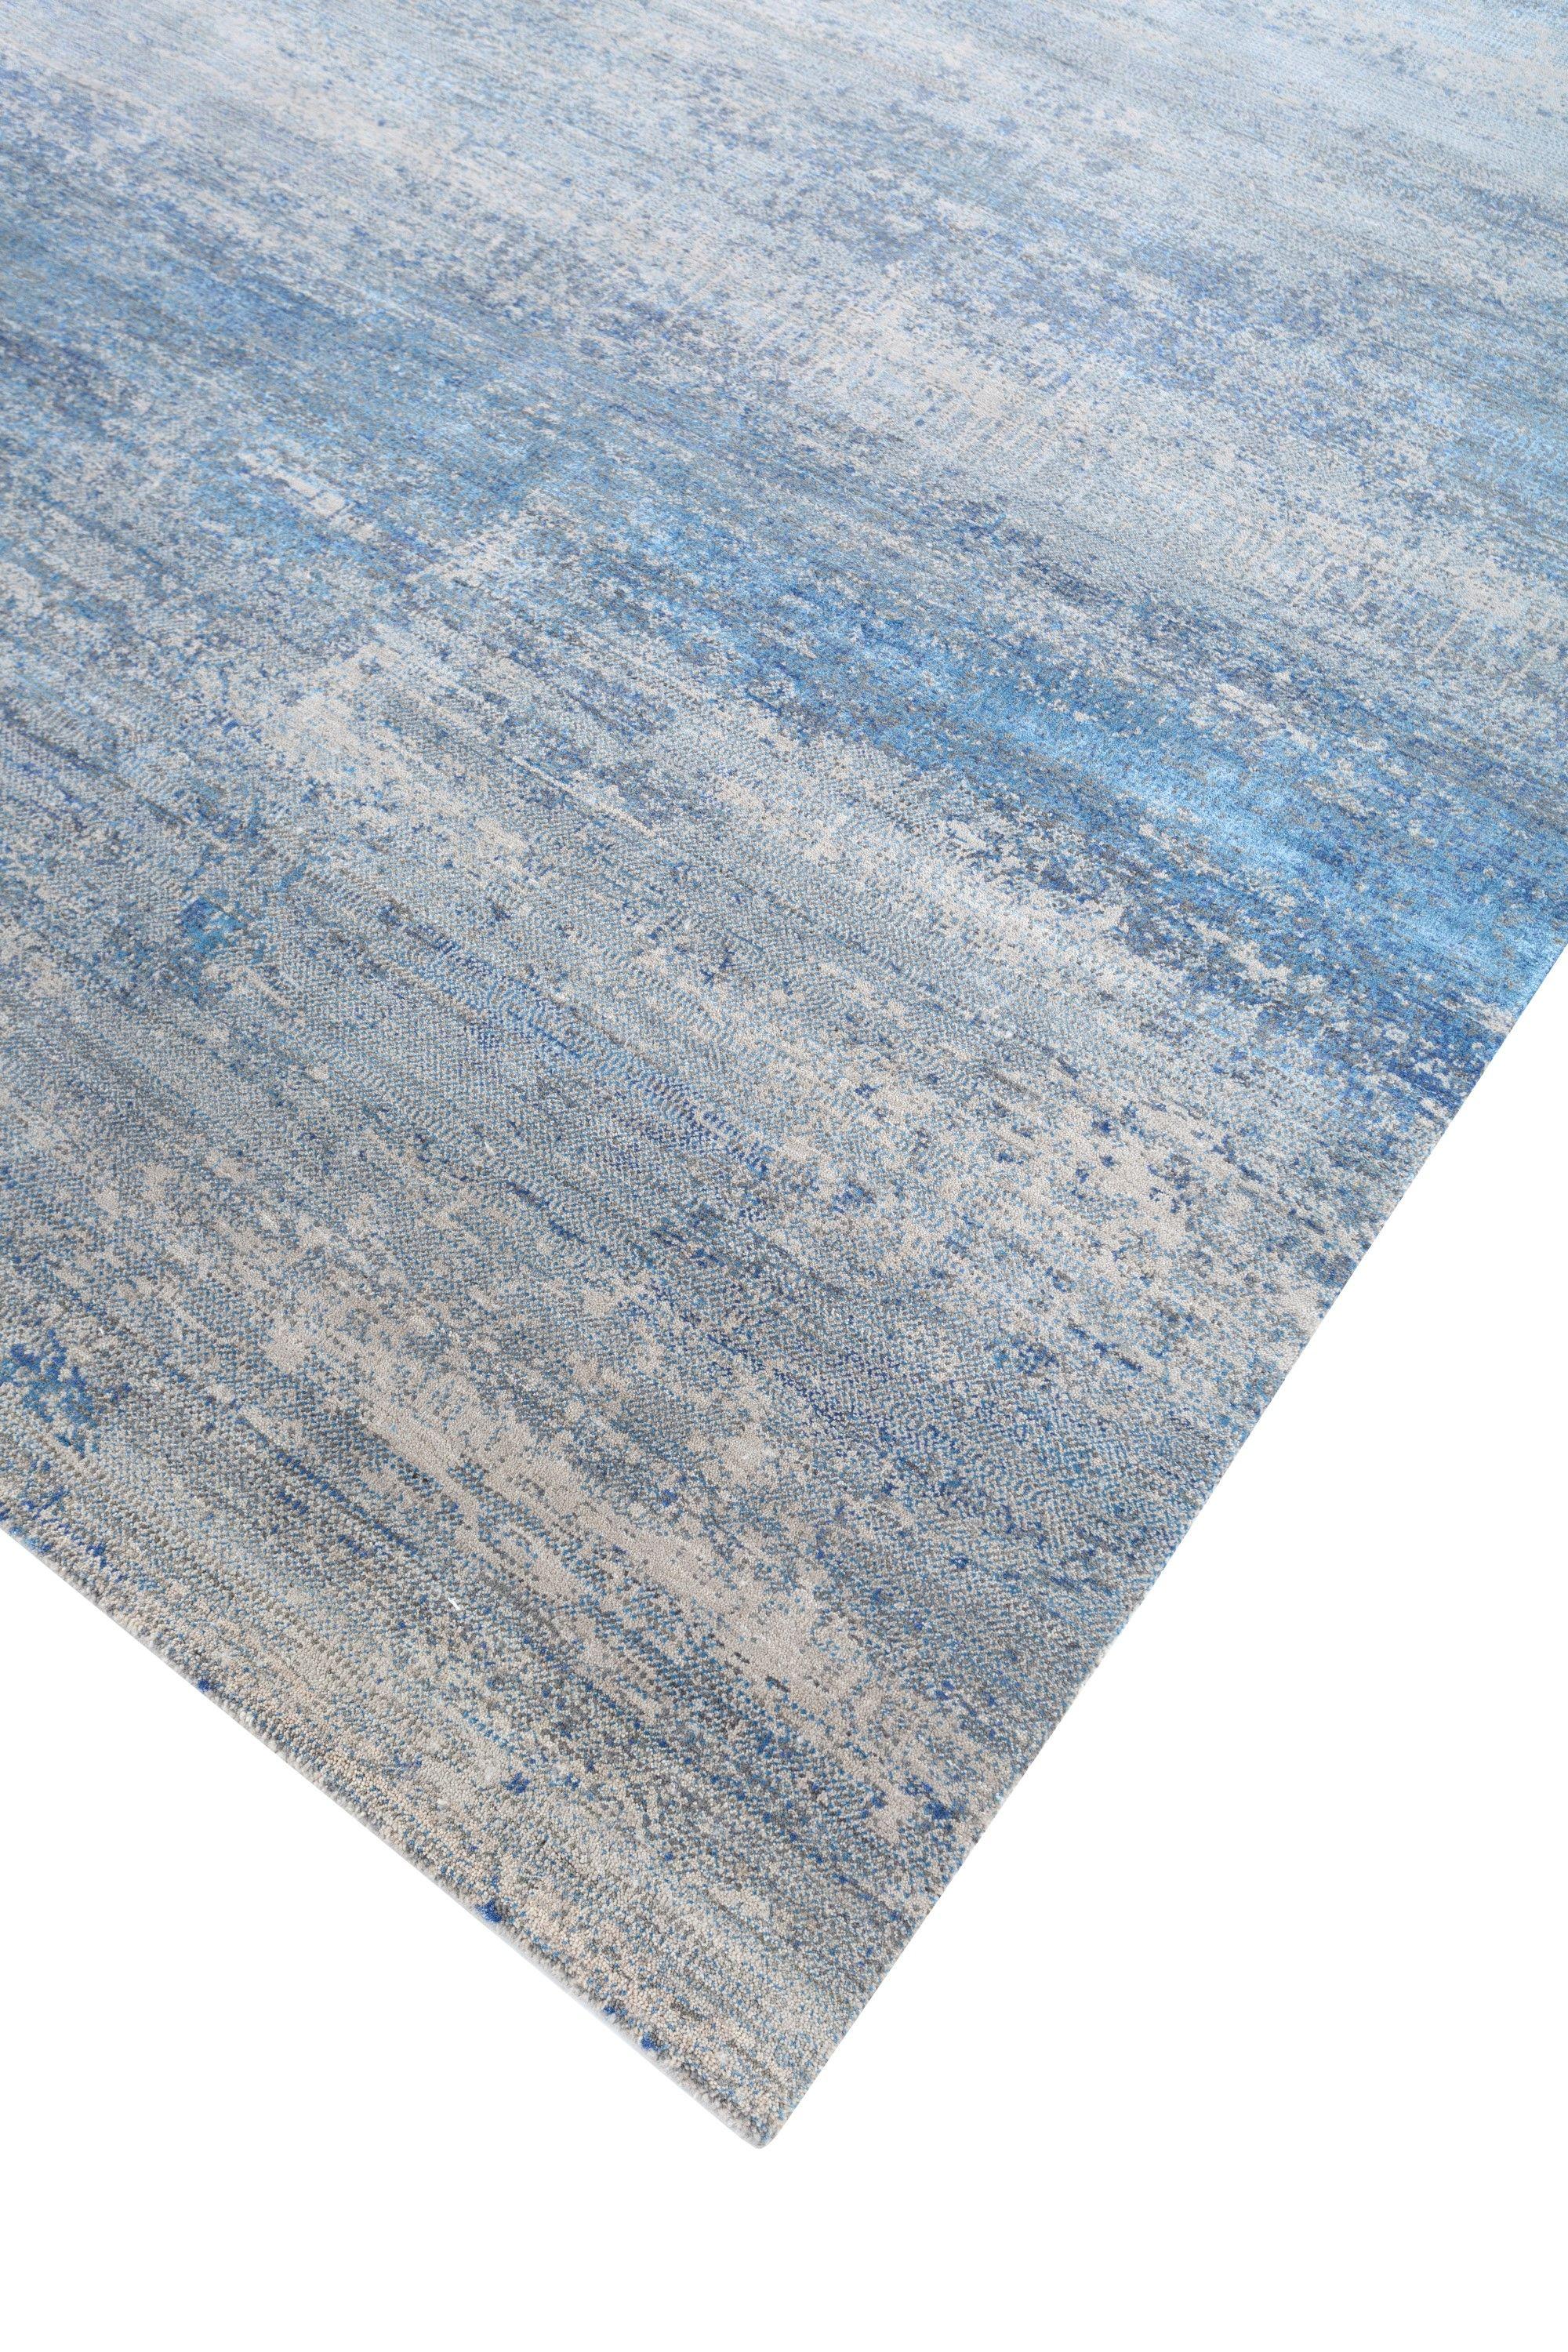 Modern Serenity Leap Classic Gray & Bermuda Blue 300X420 Cm Handknotted Rug For Sale